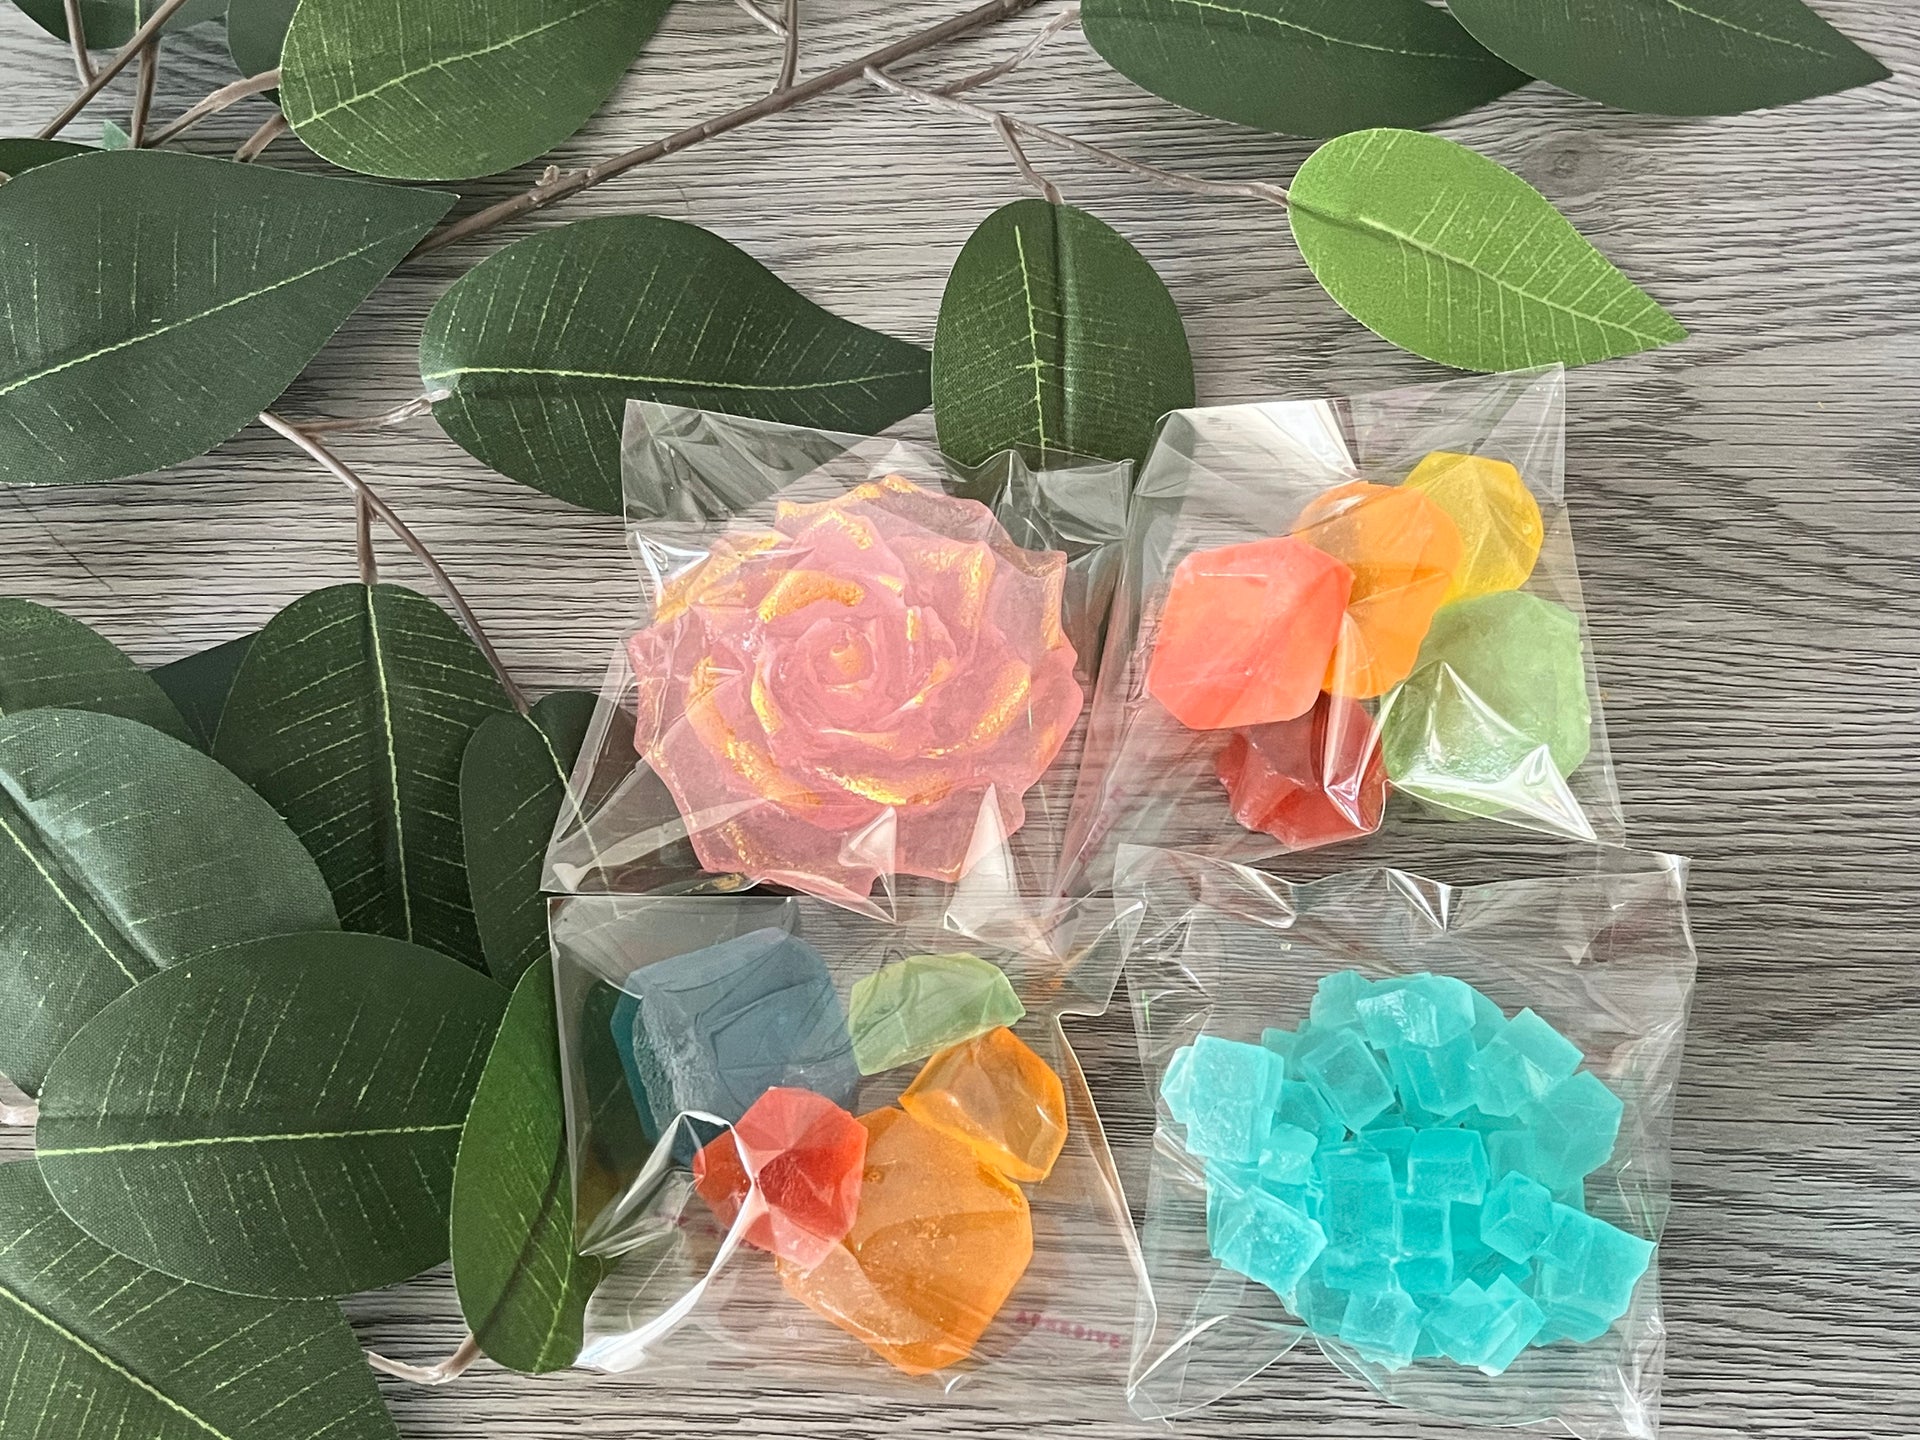 8 Flavors All Natural Kohakutou Japanese Crystal Candy, Vegan Candy, Edible  Gemstone Candy, Crystal Jelly Candy, Treasure Box of Candy 